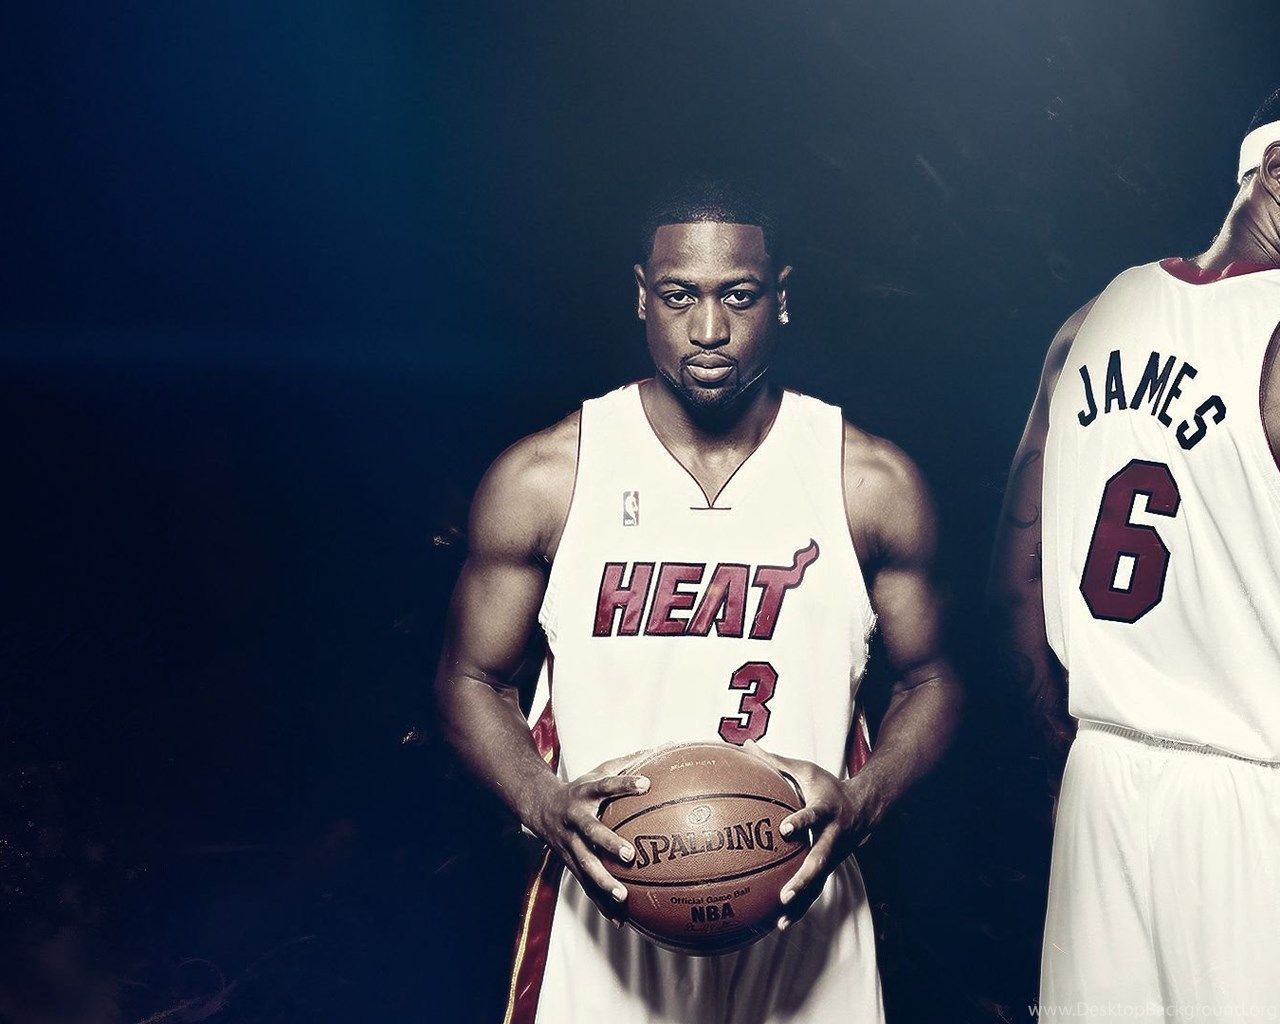 Two Basketball Players Wallpaper And Image Wallpaper. Desktop Background